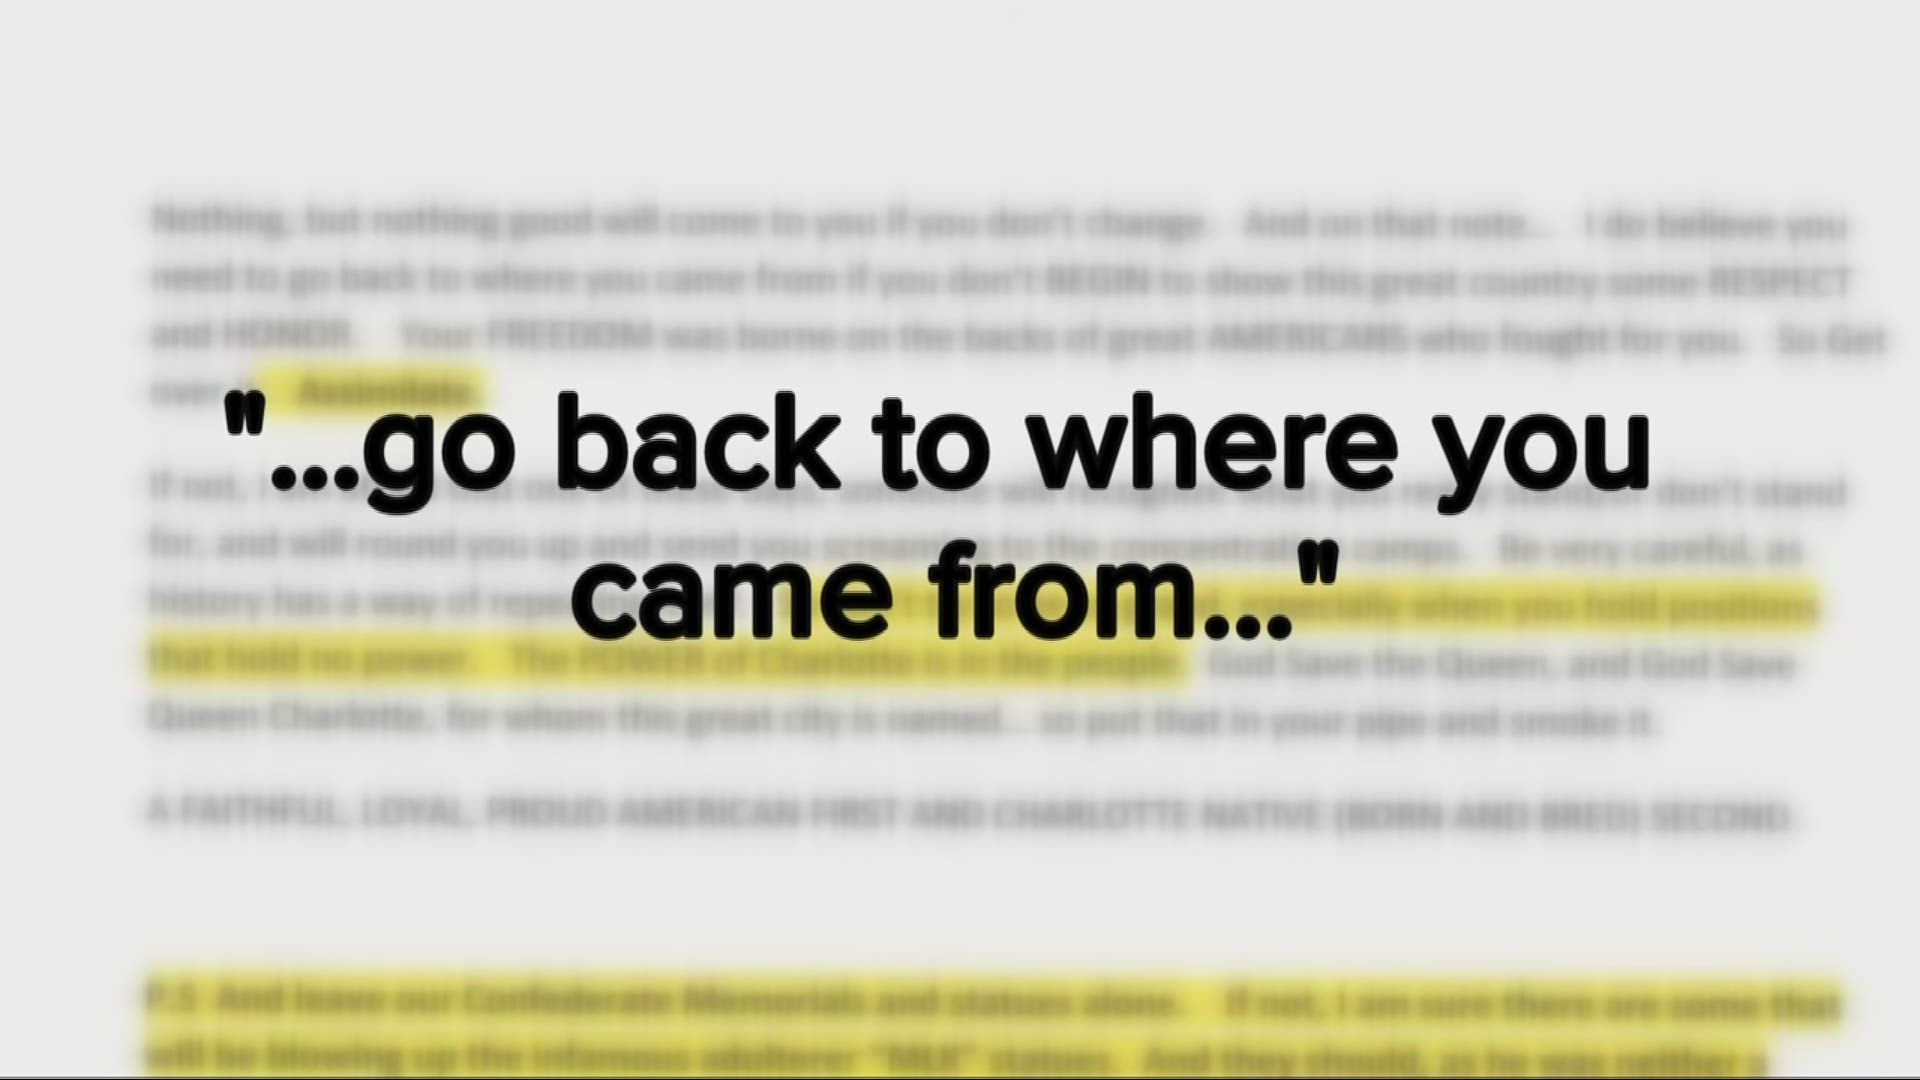 Racist, threatening letters were mailed to at least a dozen Charlotte leaders. The nearly two-page long rant even addresses the local police and fire departments.